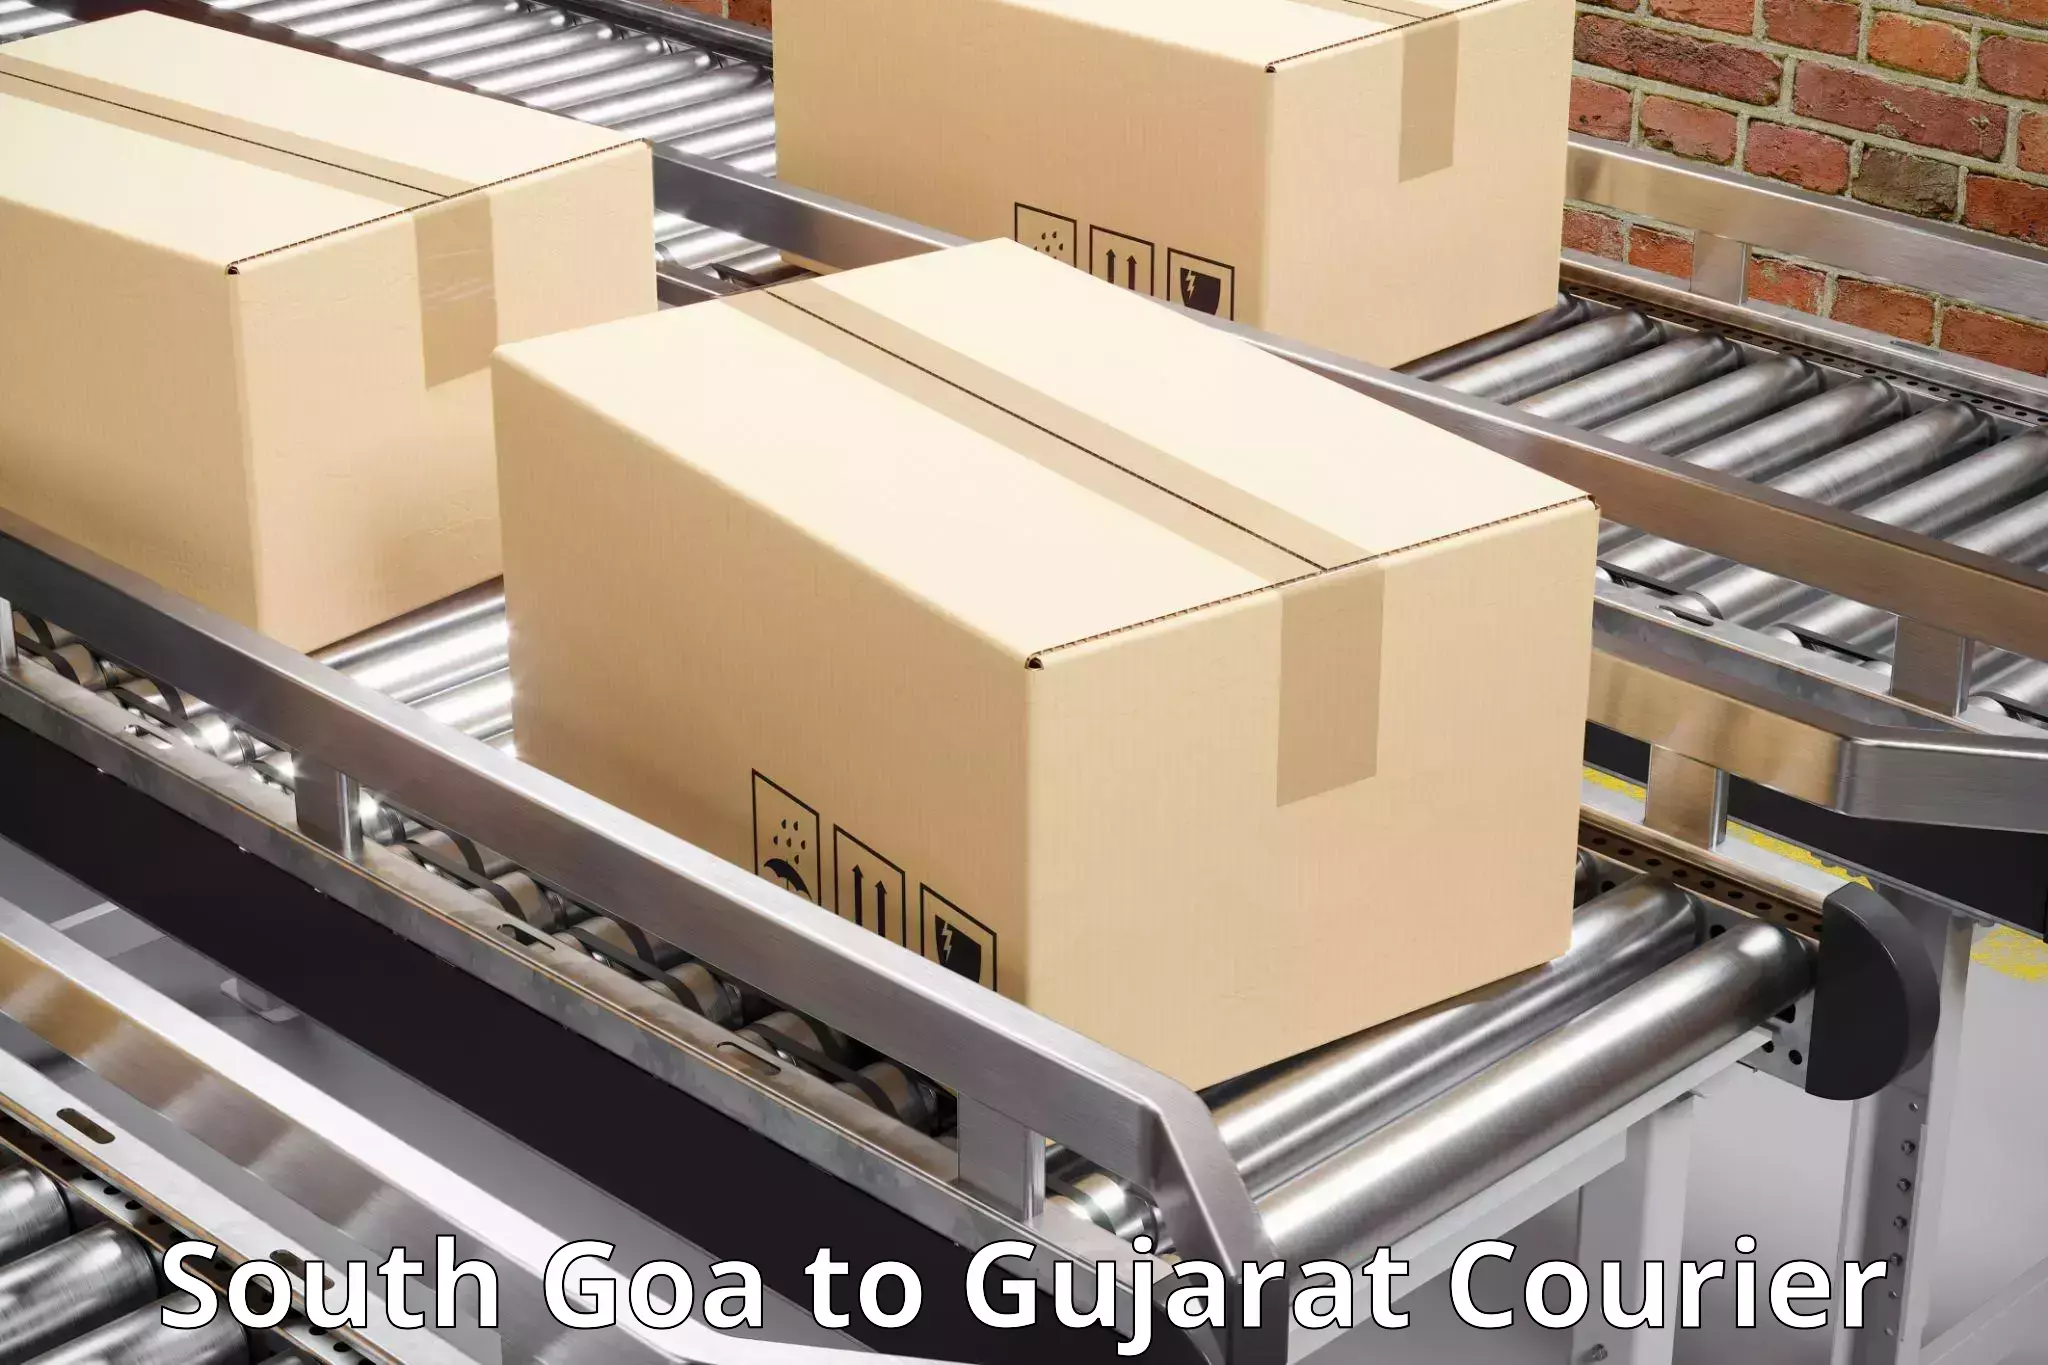 Package delivery network South Goa to Modasa